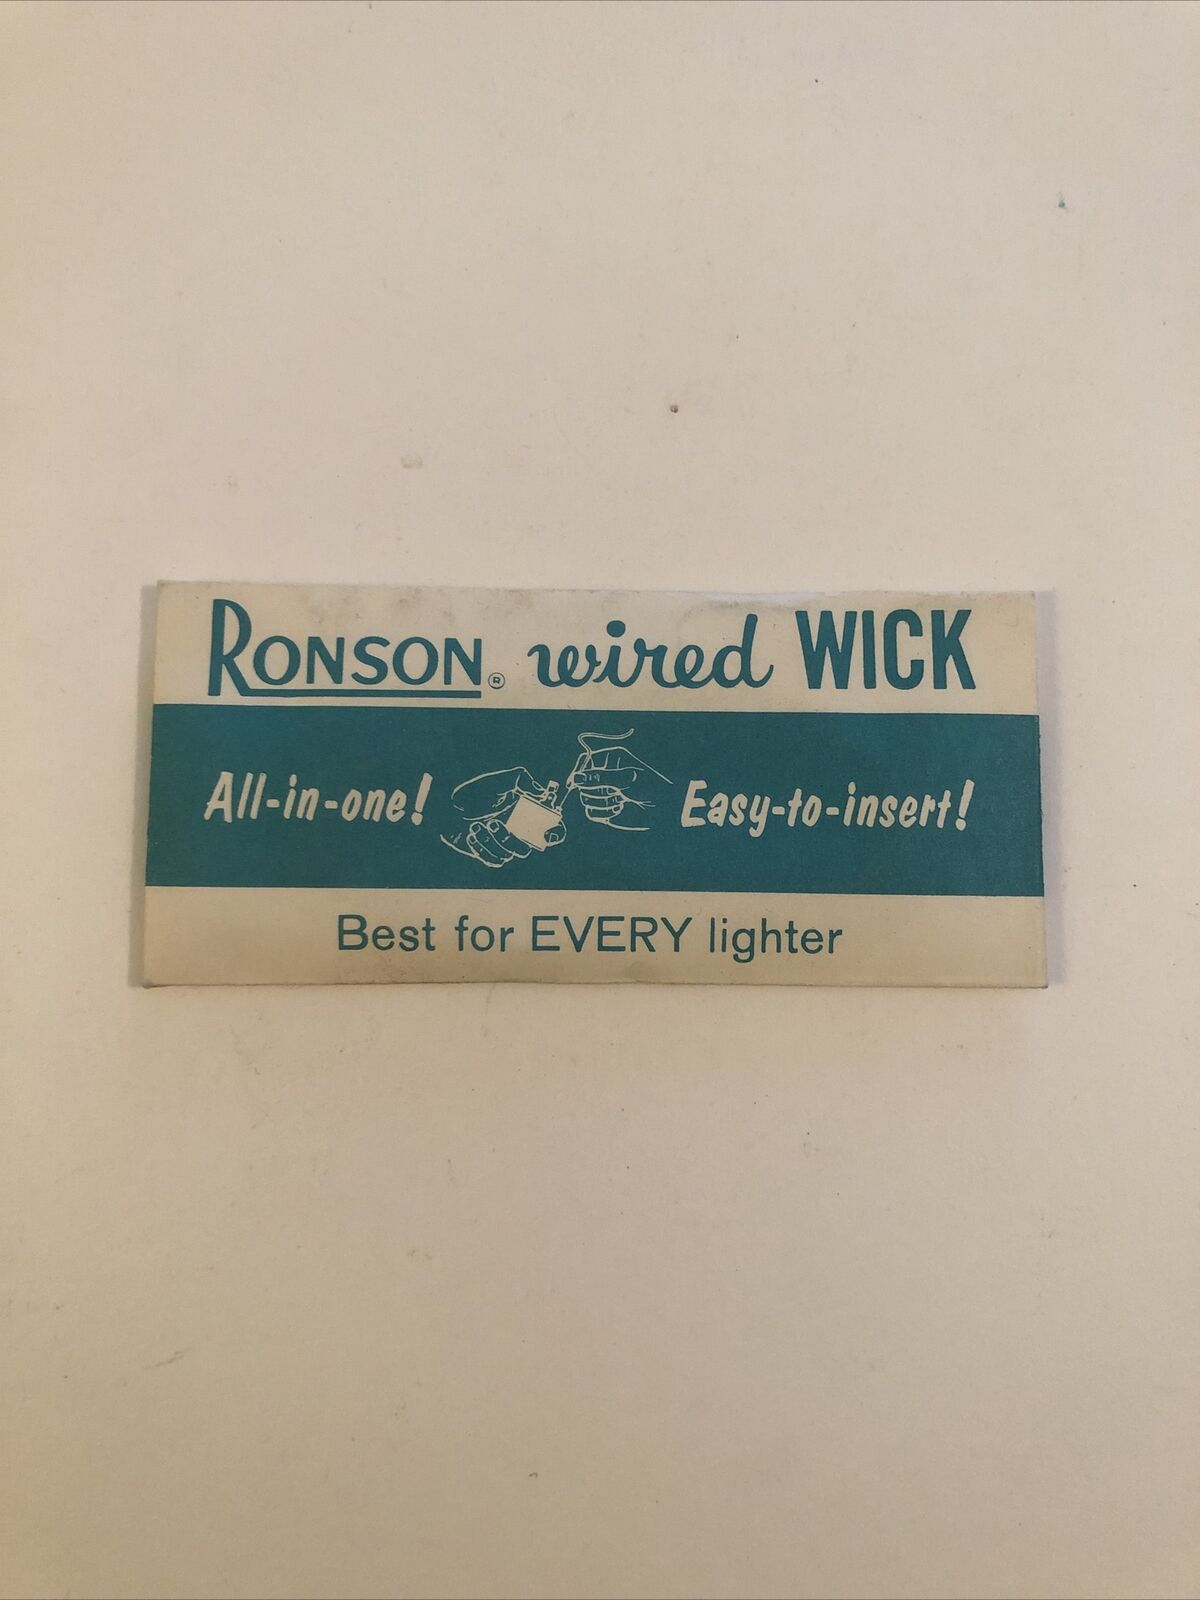 Vintage Ronson Wired Wick In Original Package NOS, Made in the USA